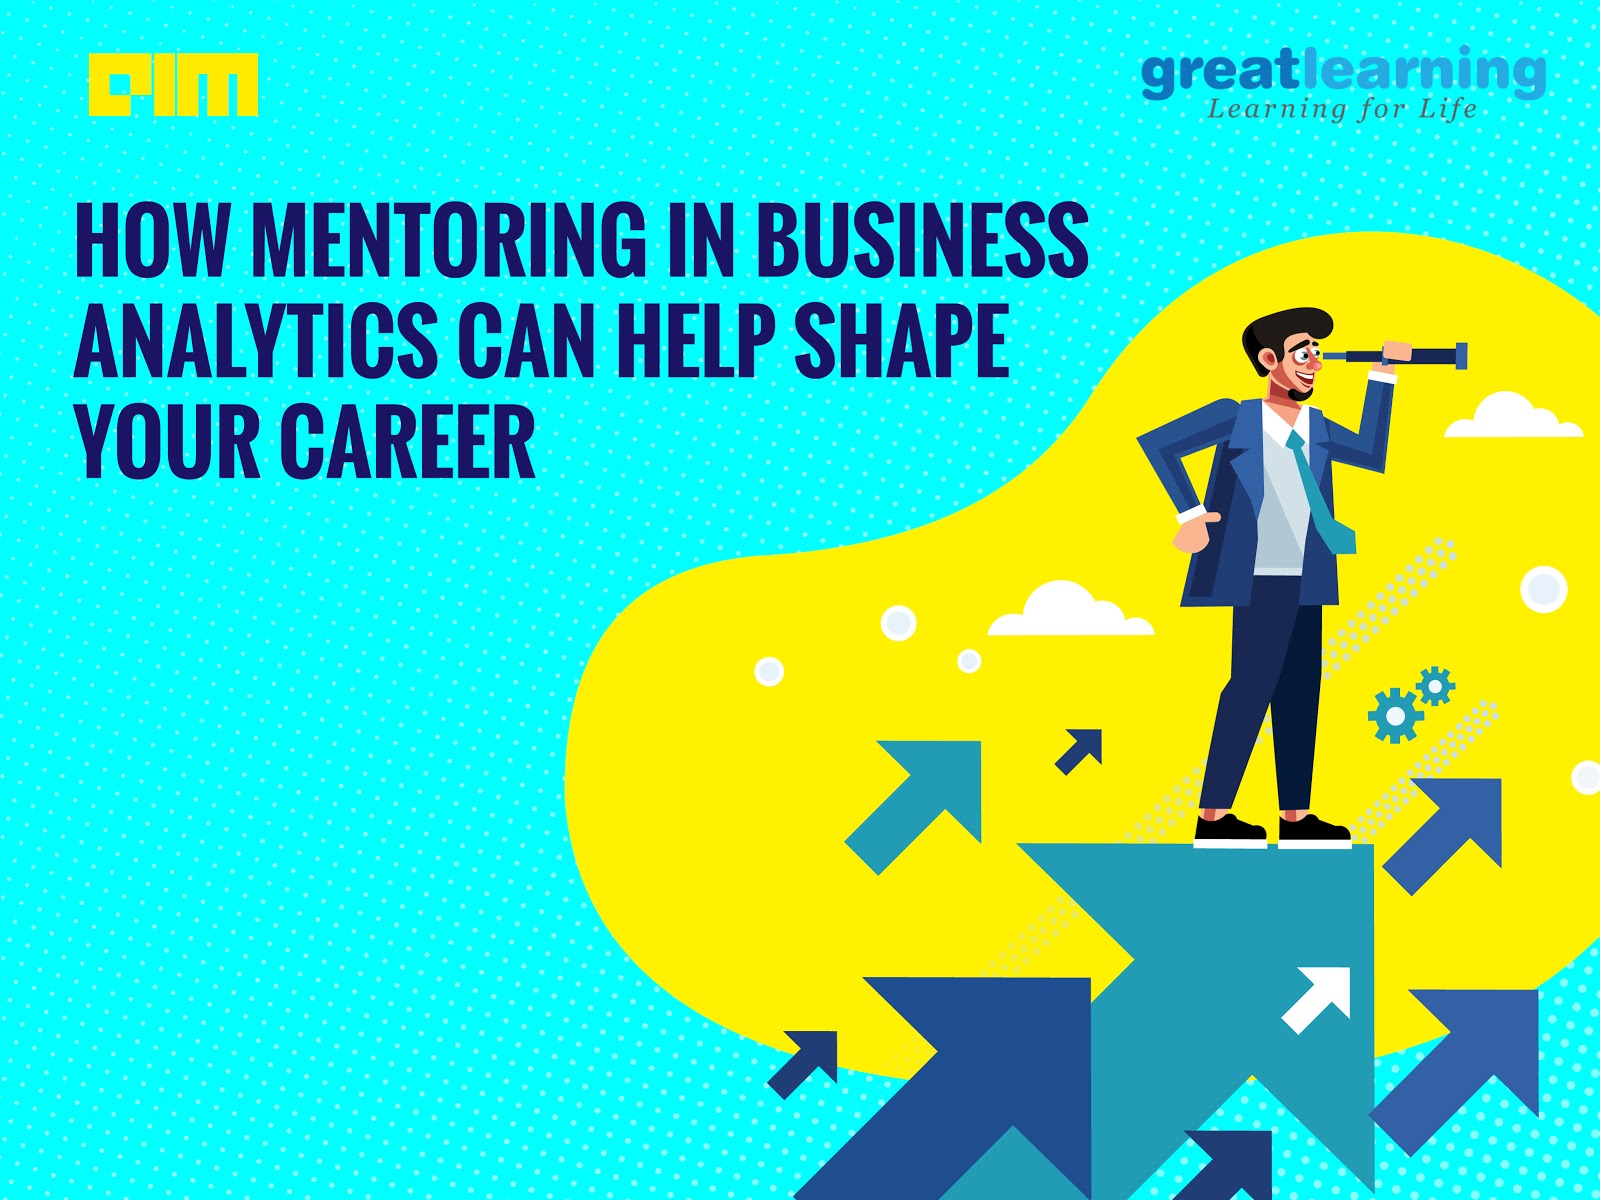 How Mentoring In Business Analytics Can Help Build a Successful Career